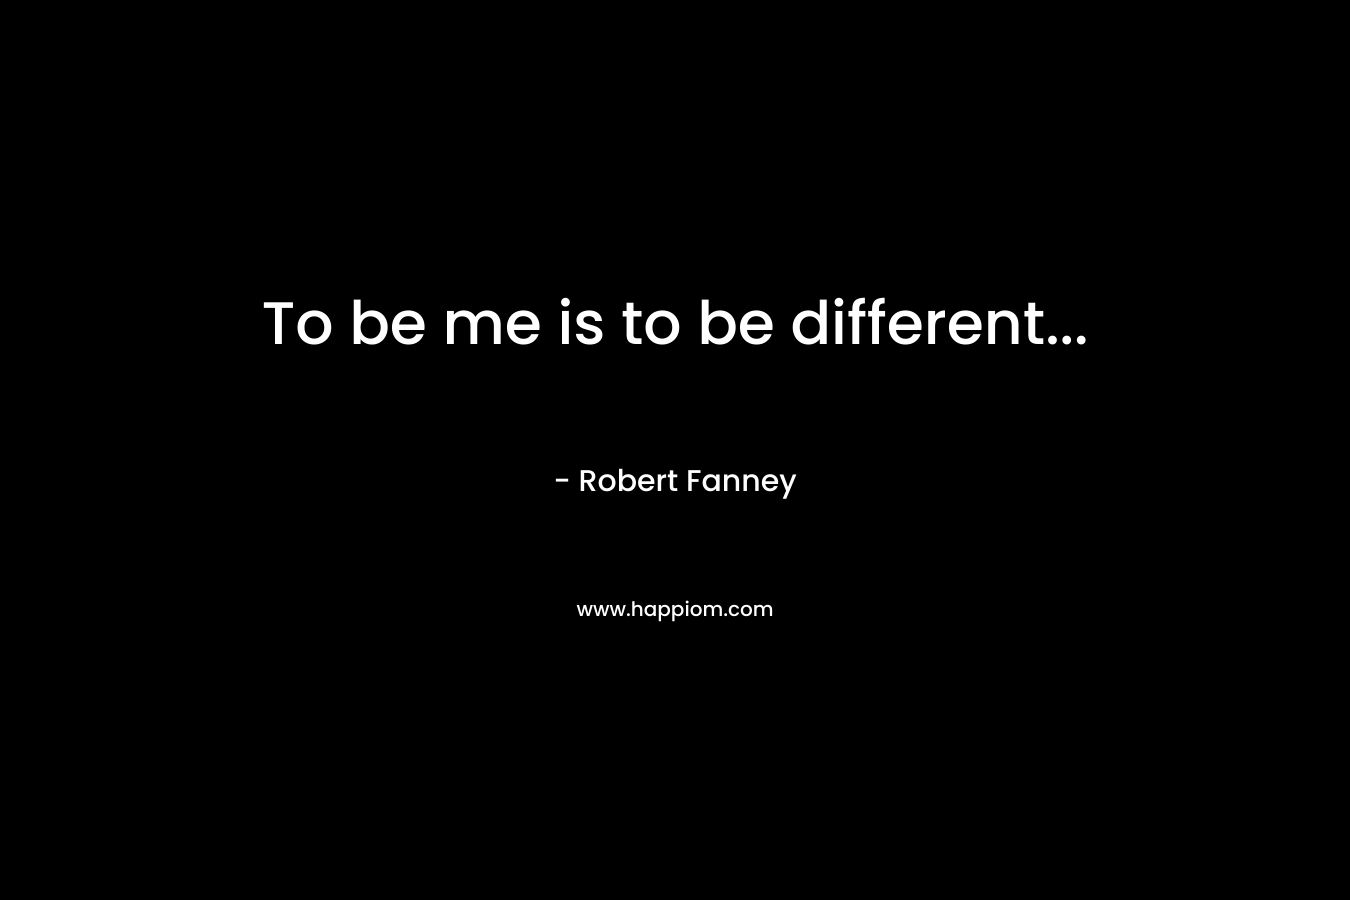 To be me is to be different...